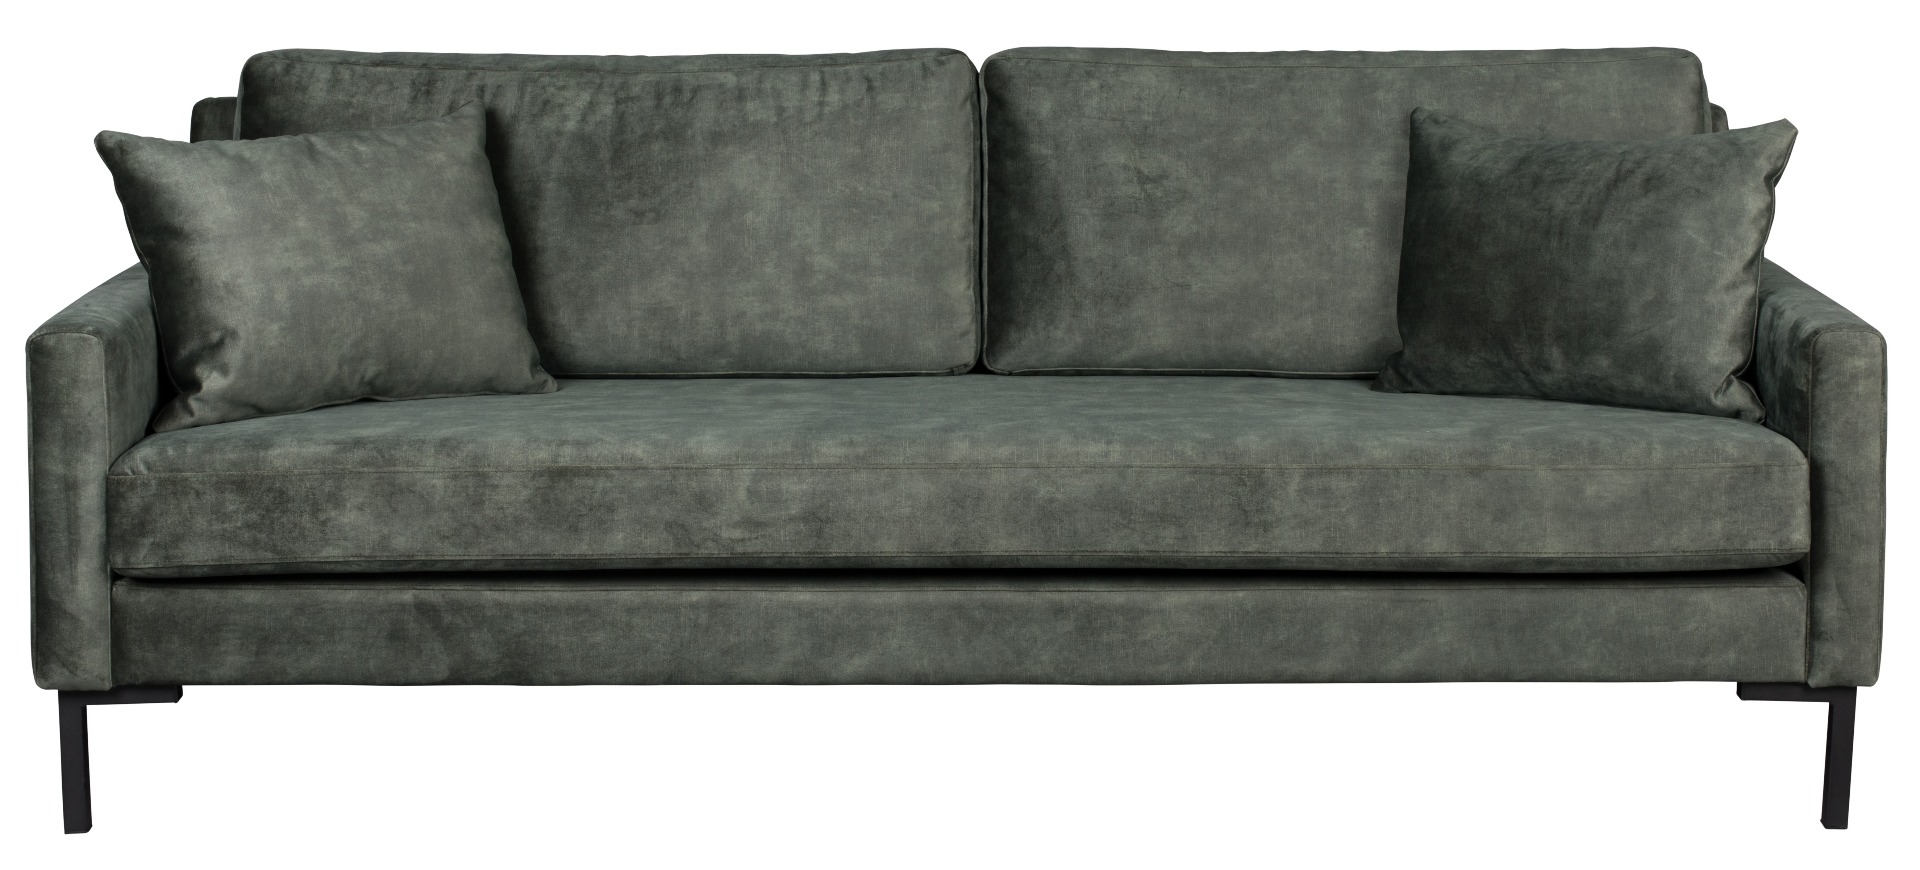 Sofa Houda 3 seater in forest